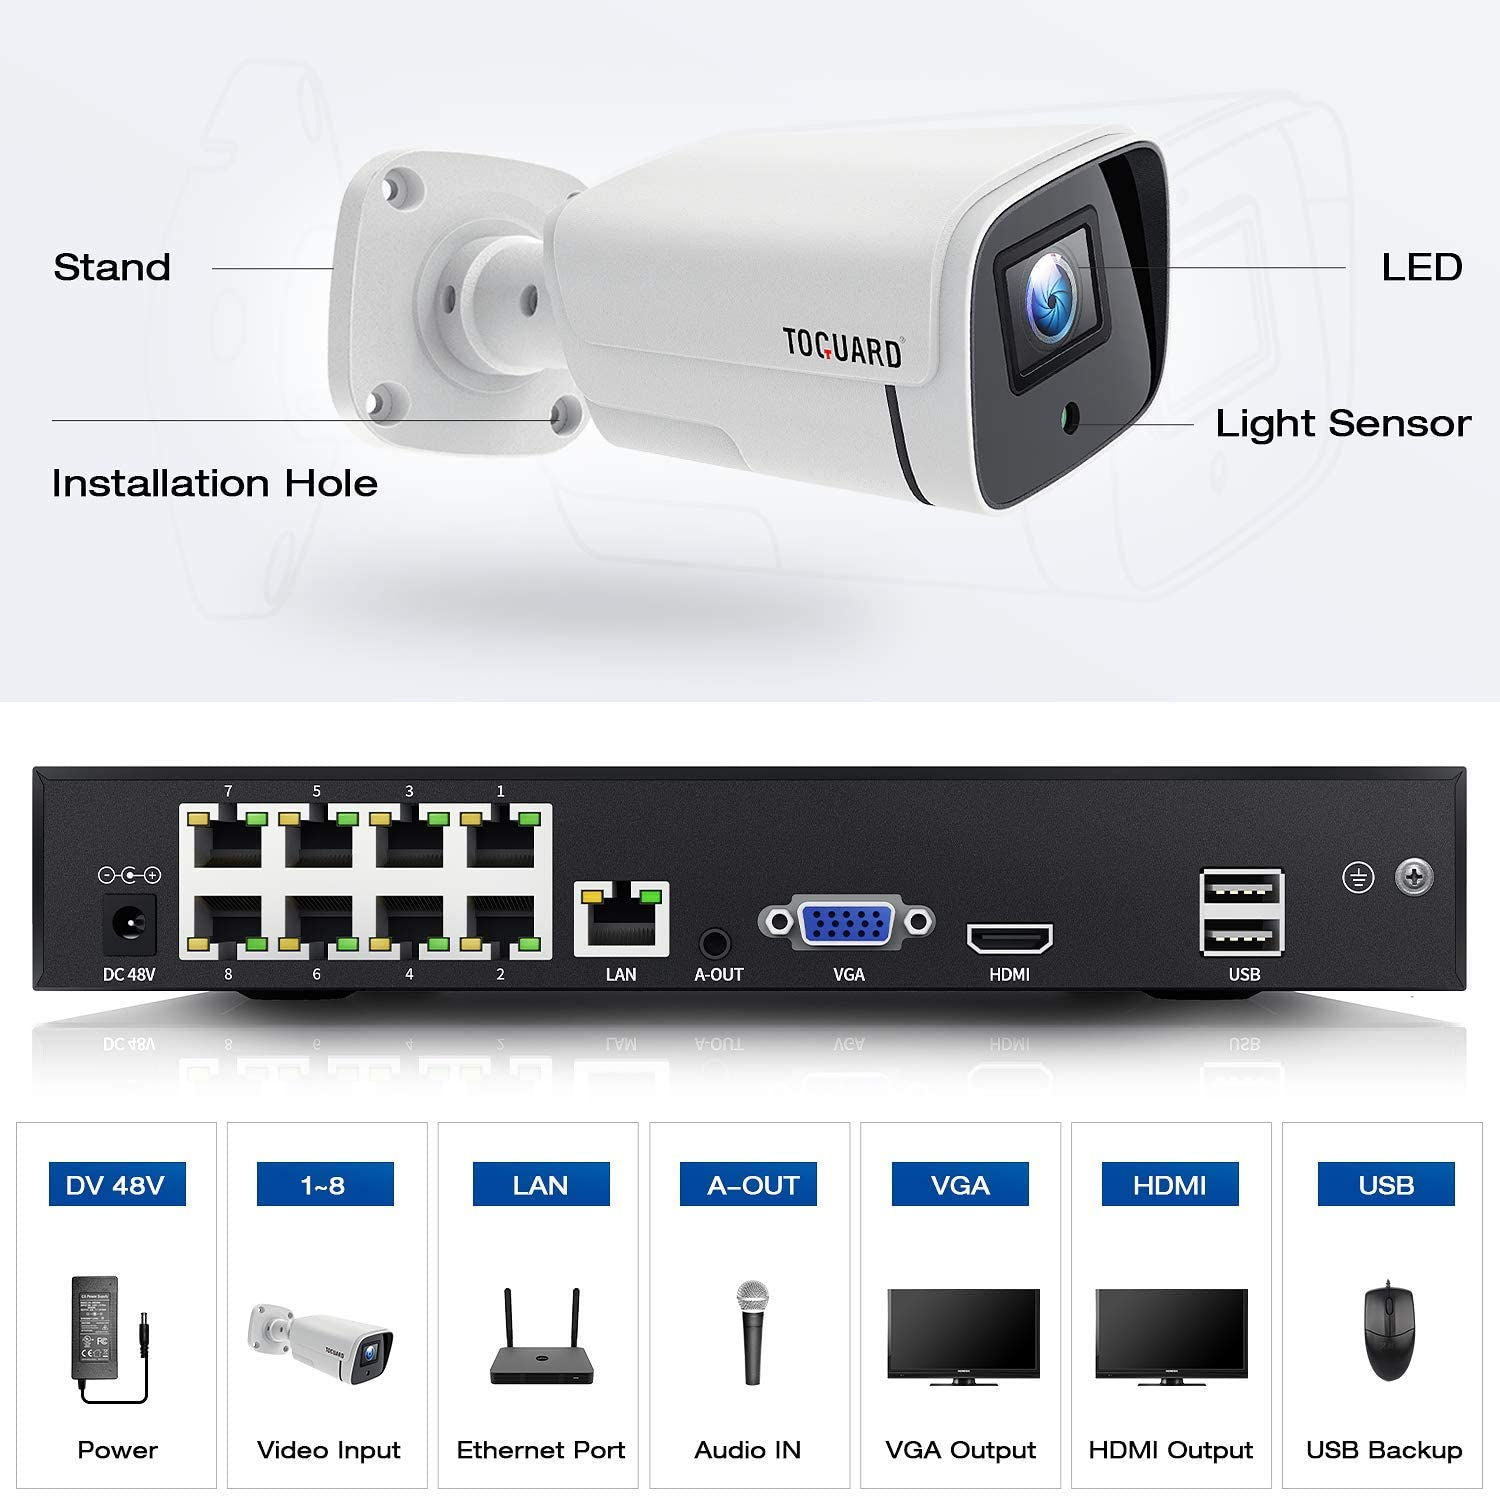 Toguard W500 4K PoE Security Camera System with 3TB Hard Drive, 4pcs 8MP Wired IP Camera Surveillance System (Only Available In Canada)